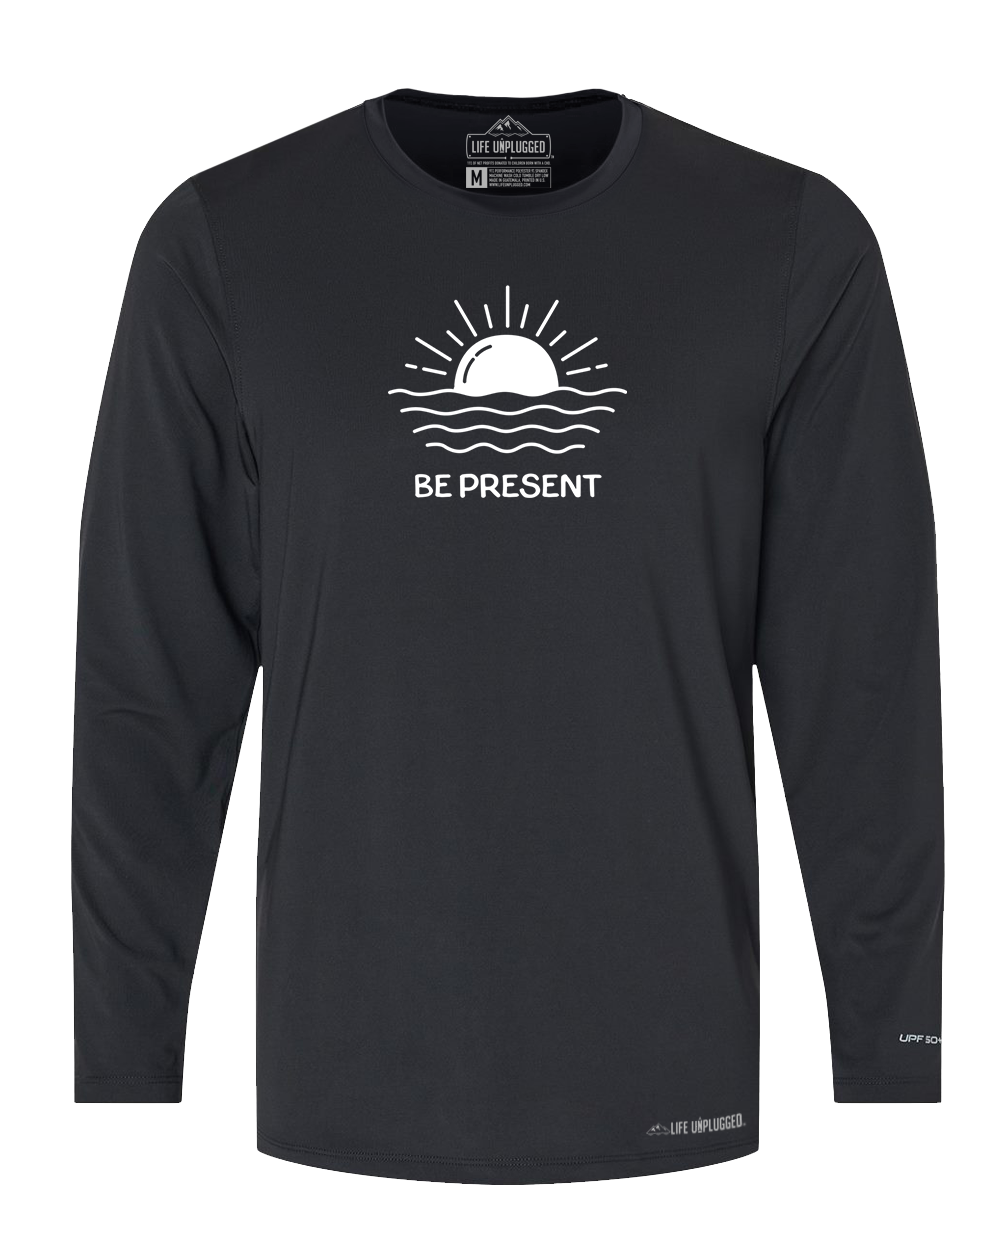 OCEAN SUNSET Poly/Spandex High Performance Long Sleeve with UPF 50+